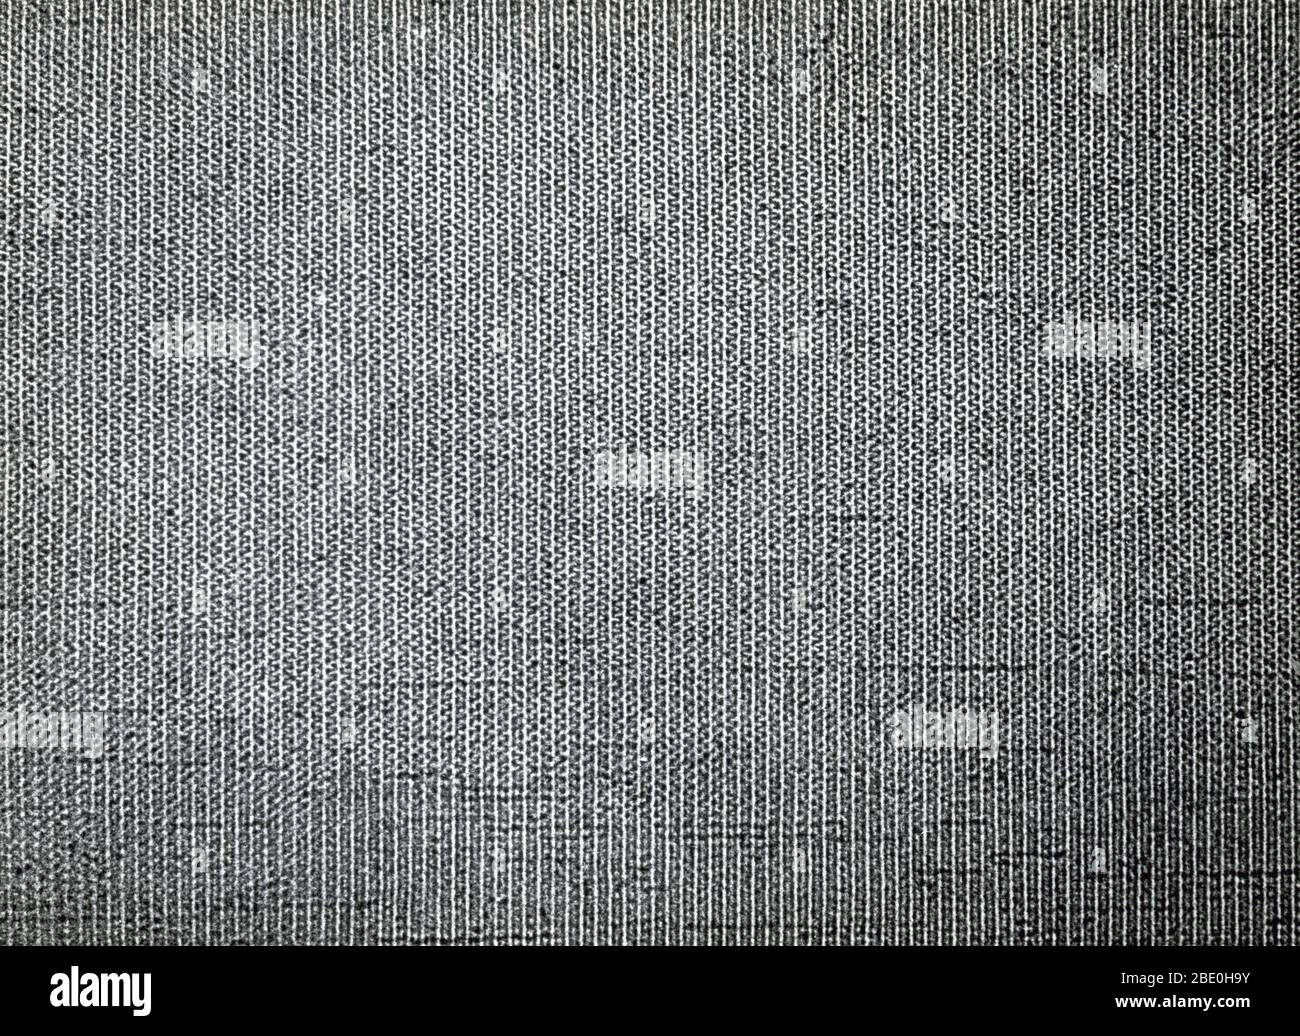 High resolution transmission electron micrograph of catalase crystals stained with uranyl acetate and shadowed with platinum-carbon, showing the fine structure of rows. Magnification: 450,000x at 9 x 12'. Stock Photo